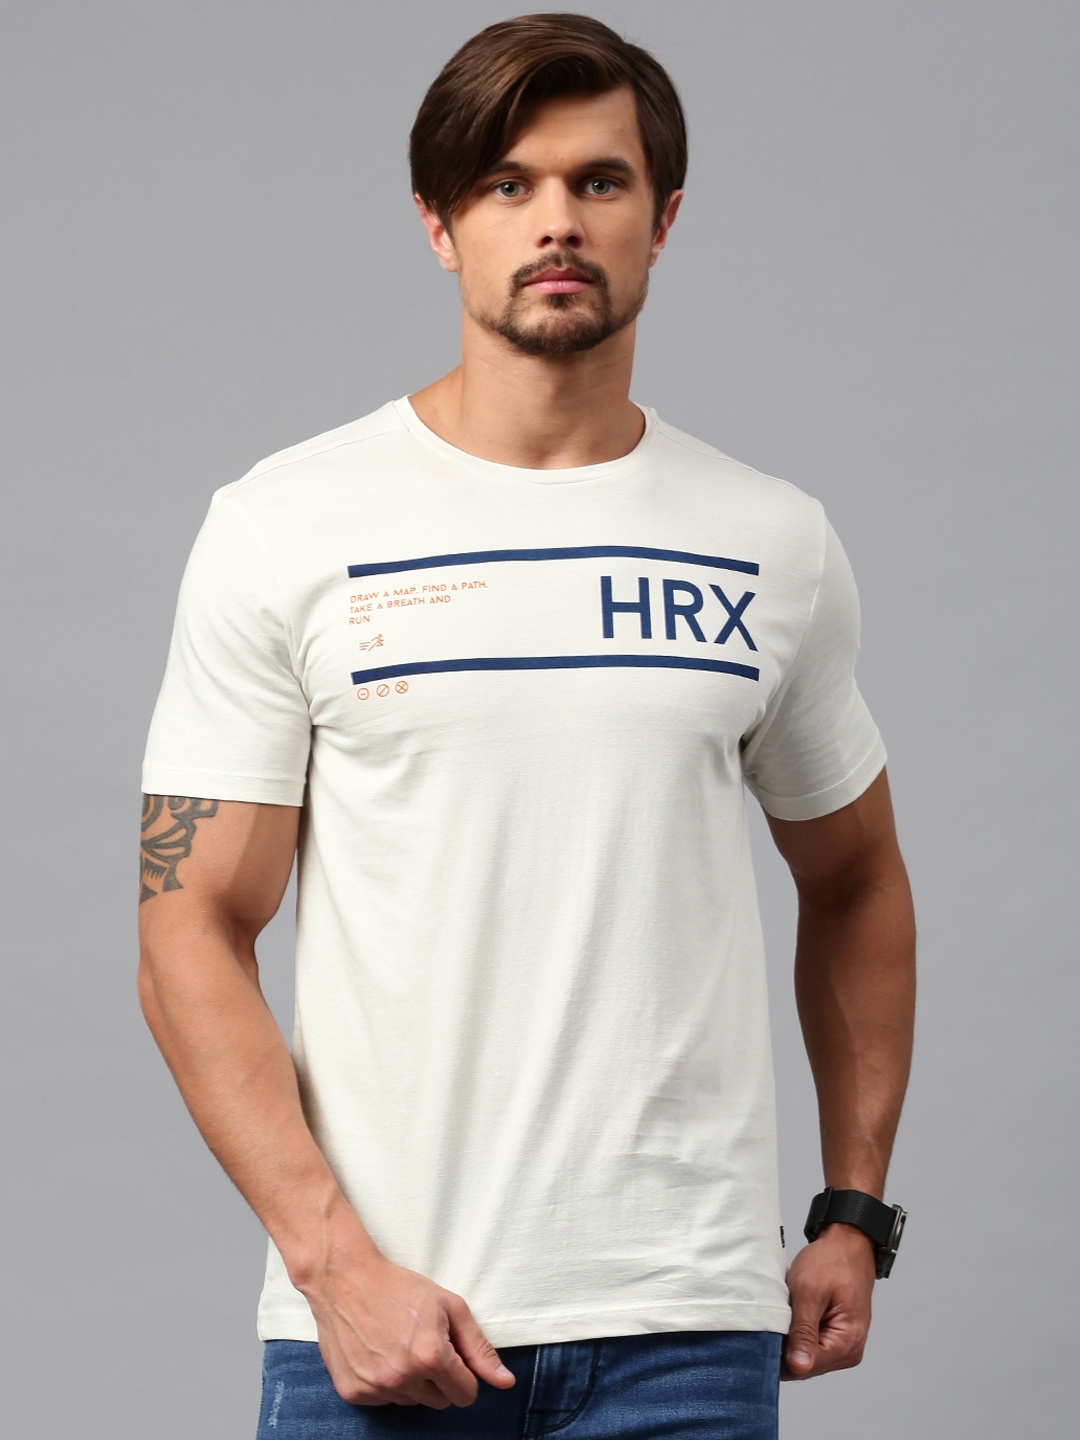 Buy latest Women's Sportswear from HRX online in India - Top Collection at  LooksGud.in | Looksgud.in